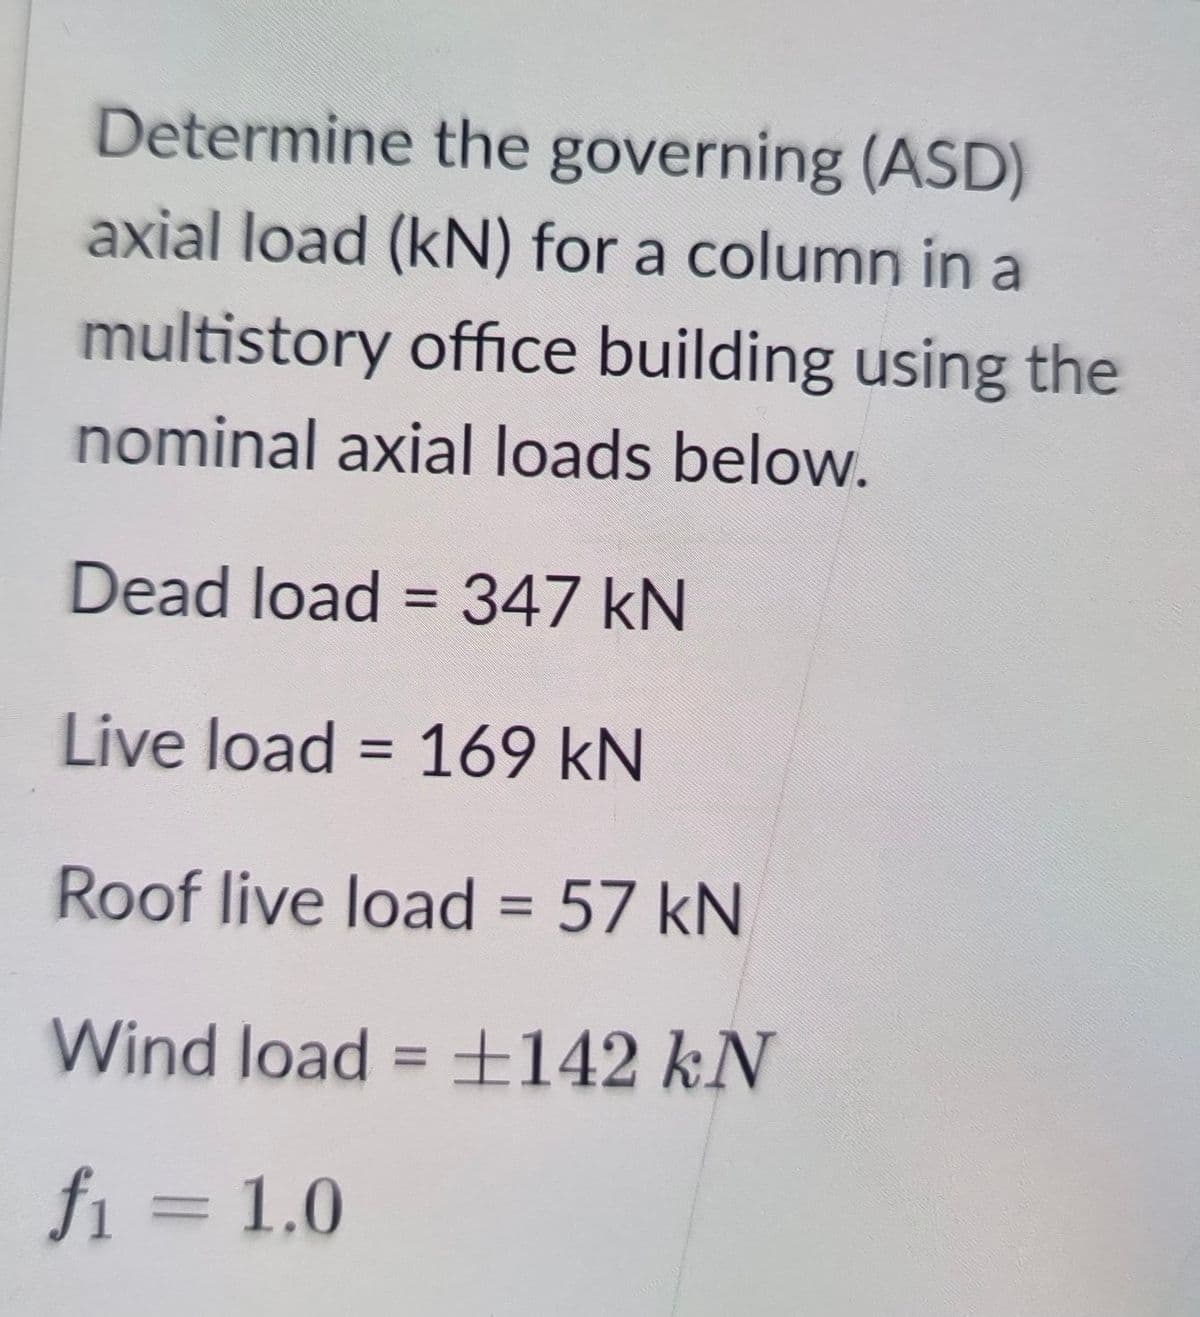 Determine the governing (ASD)
axial load (kN) for a column in a
multistory office building using the
nominal axial loads below.
Dead load = 347 kN
%3D
Live load = 169 kN
%3D
Roof live load = 57 kN
%3D
Wind load = 142 kN
%3D
fi = 1.0
